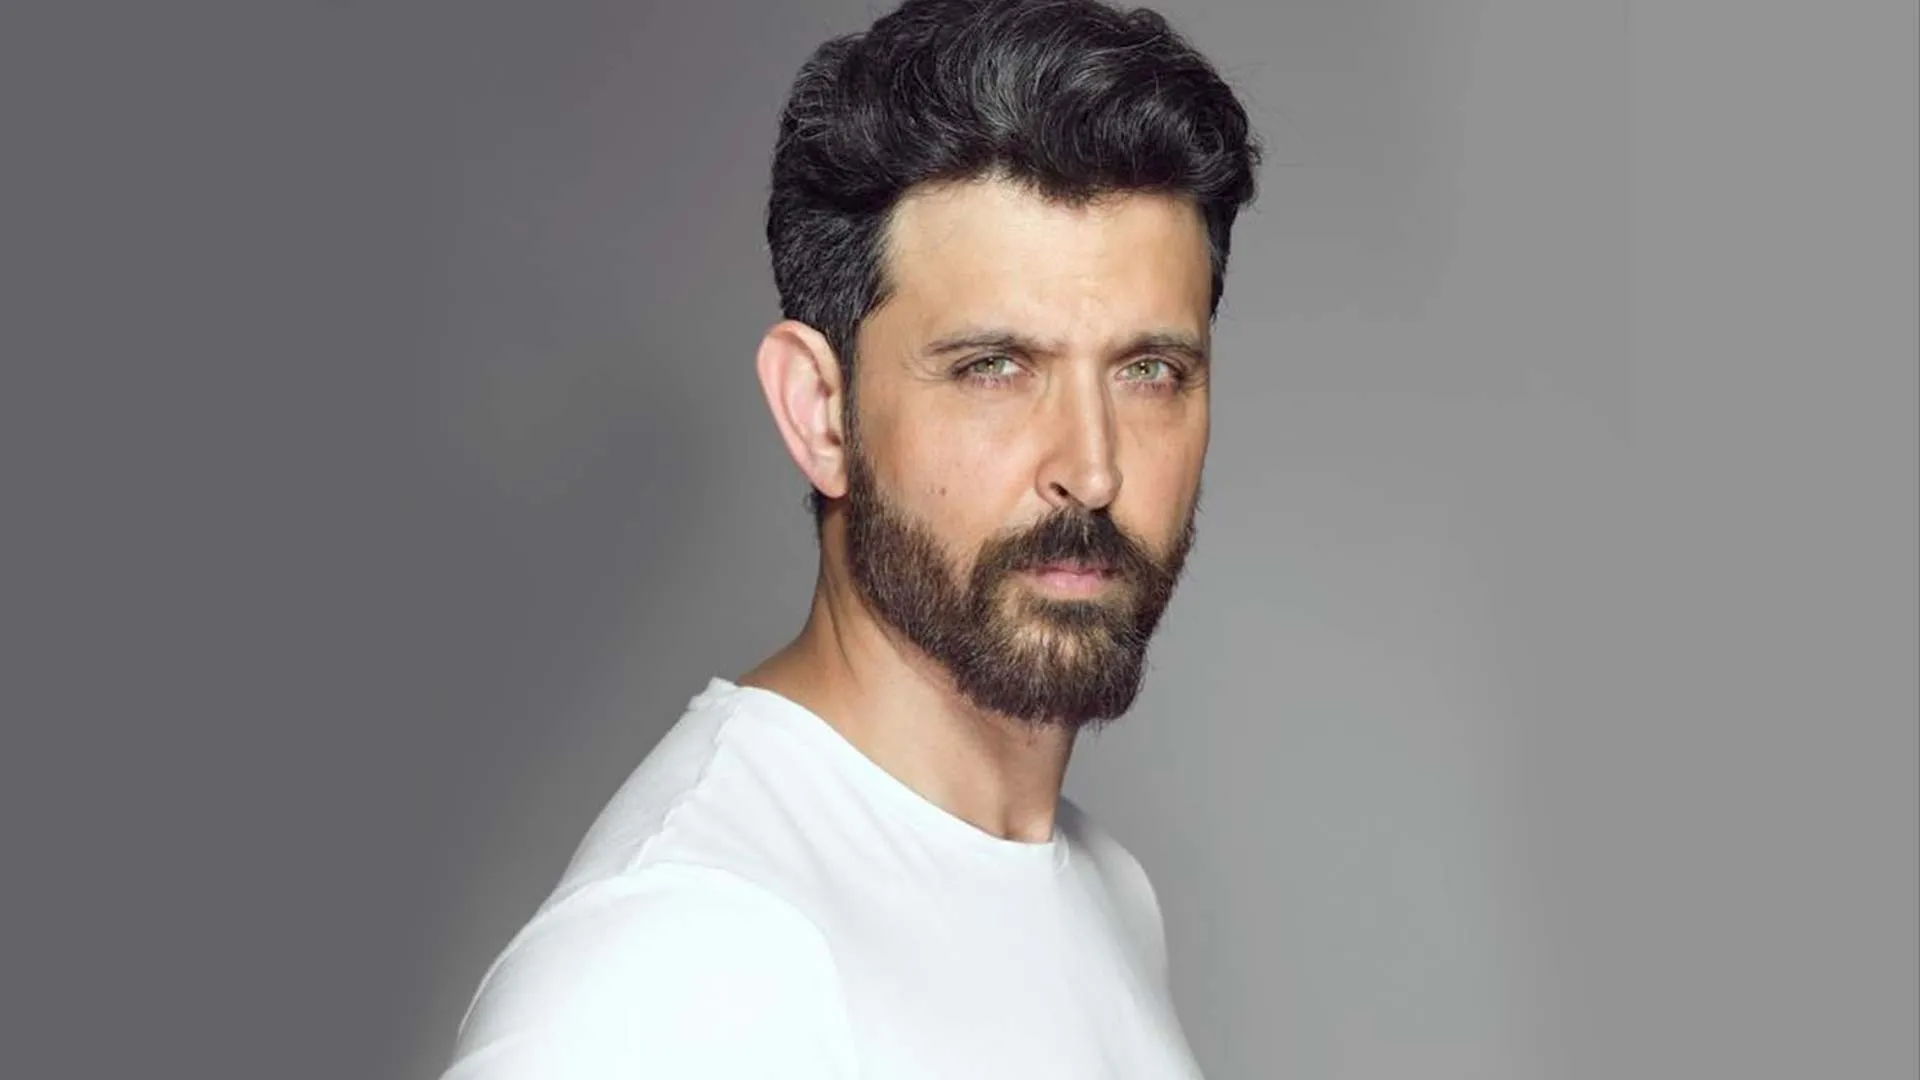 After the underperformance of Vikram Vedha and Fighter, trade experts open up on why success is eluding Hrithik Roshan: “Hrithik is not Sunny Deol. He’s a multiplex star. He’s disconnected from the masses. He should look into how South actors are connected with their fans and learn”